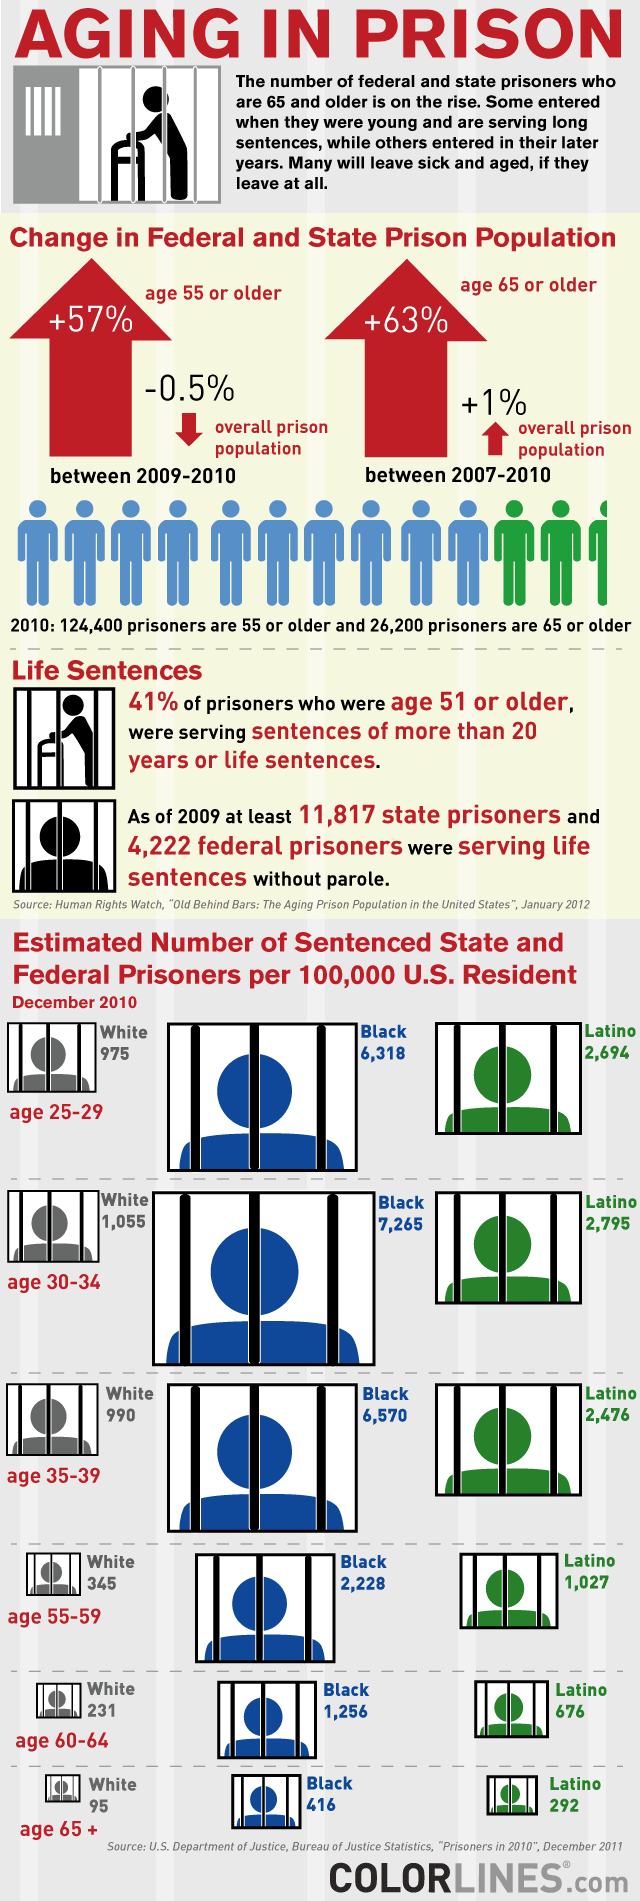 Aging-in-Prison-infographic-by-HRW-ColorLines, No place for old men, Abolition Now! Featured News & Views World News & Views 